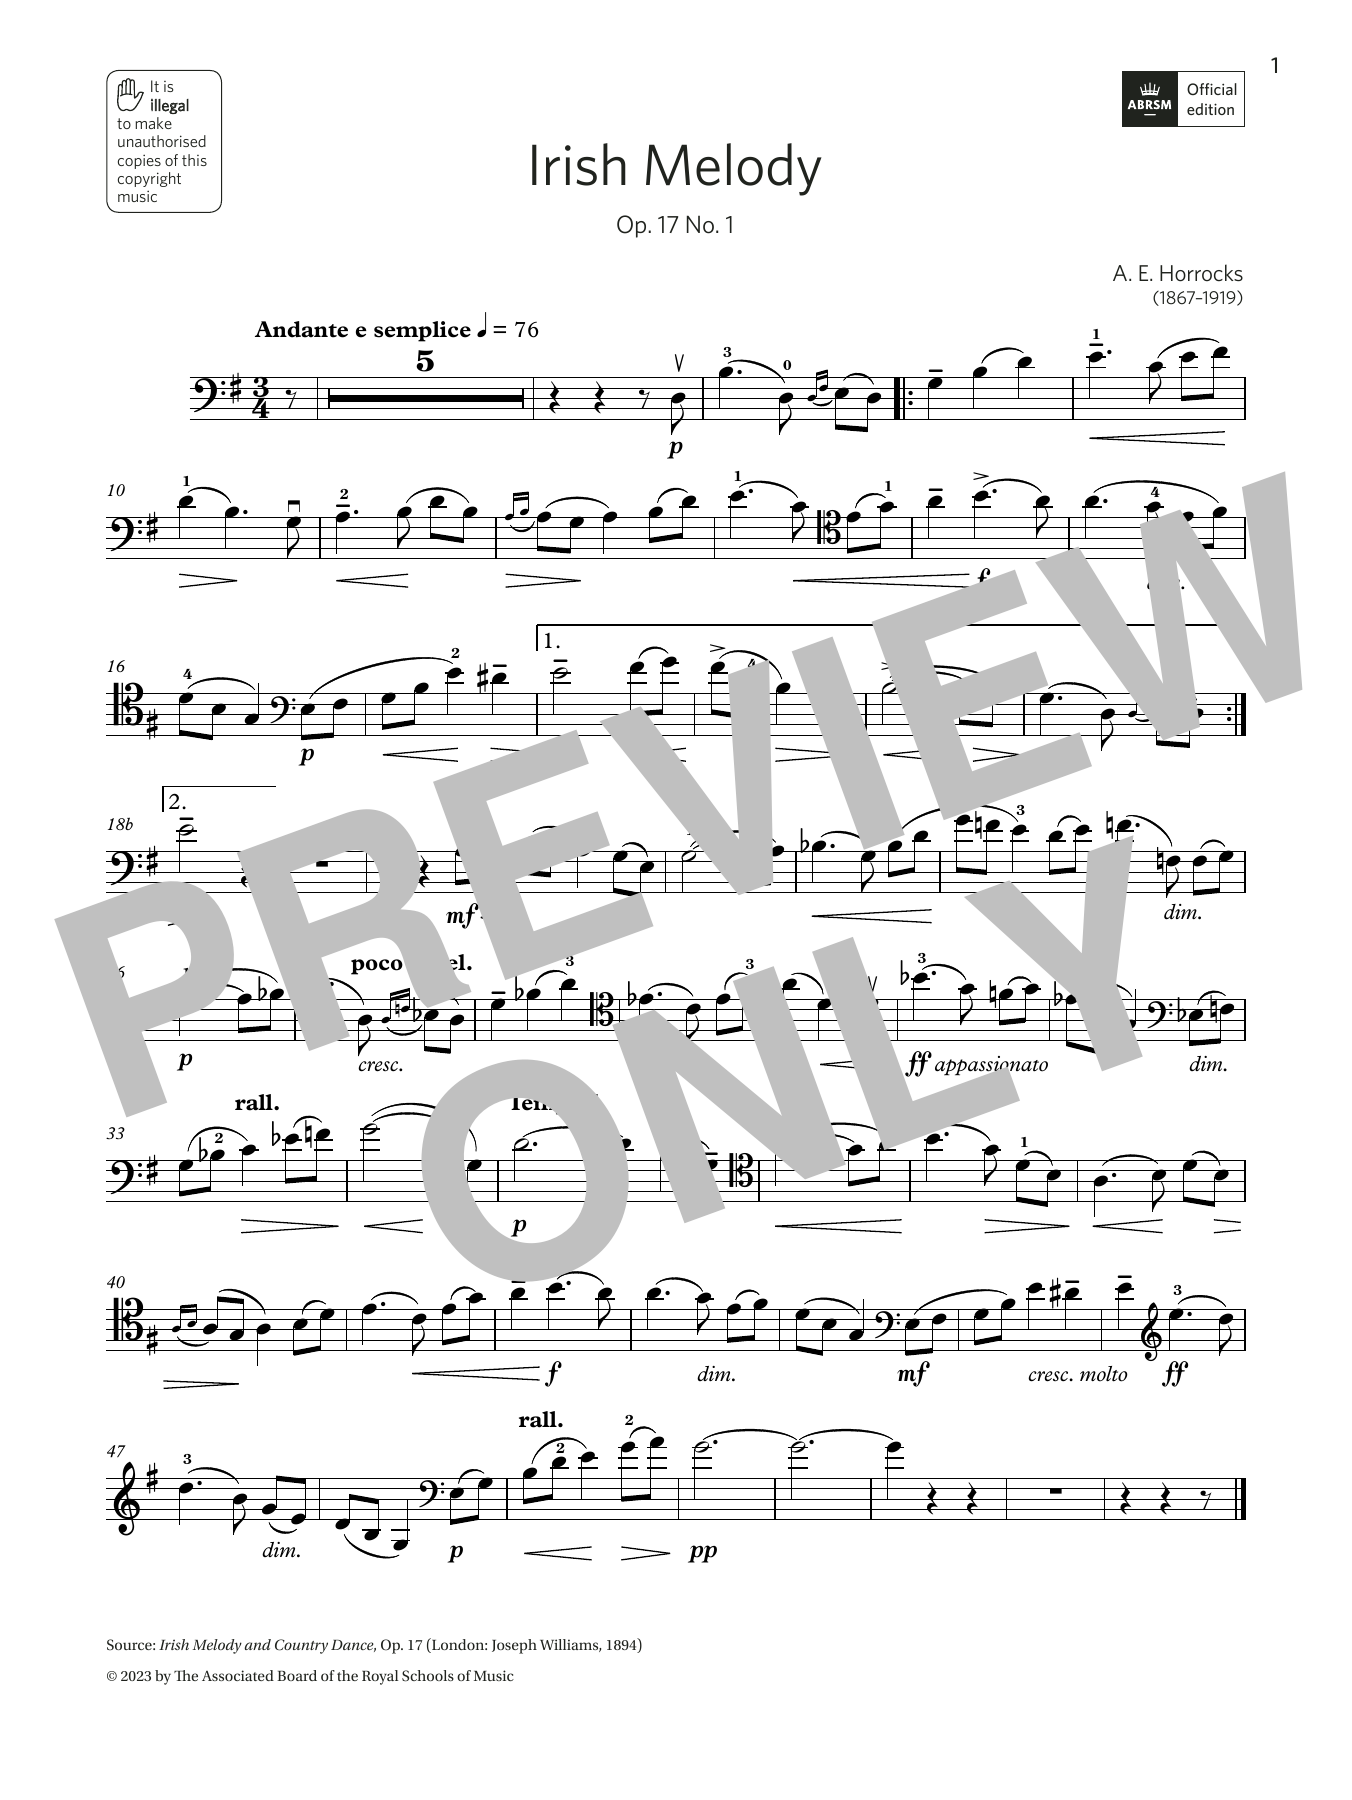 Download Amy Elsie Horrocks Irish Melody (Grade 6, B13, from the AB Sheet Music